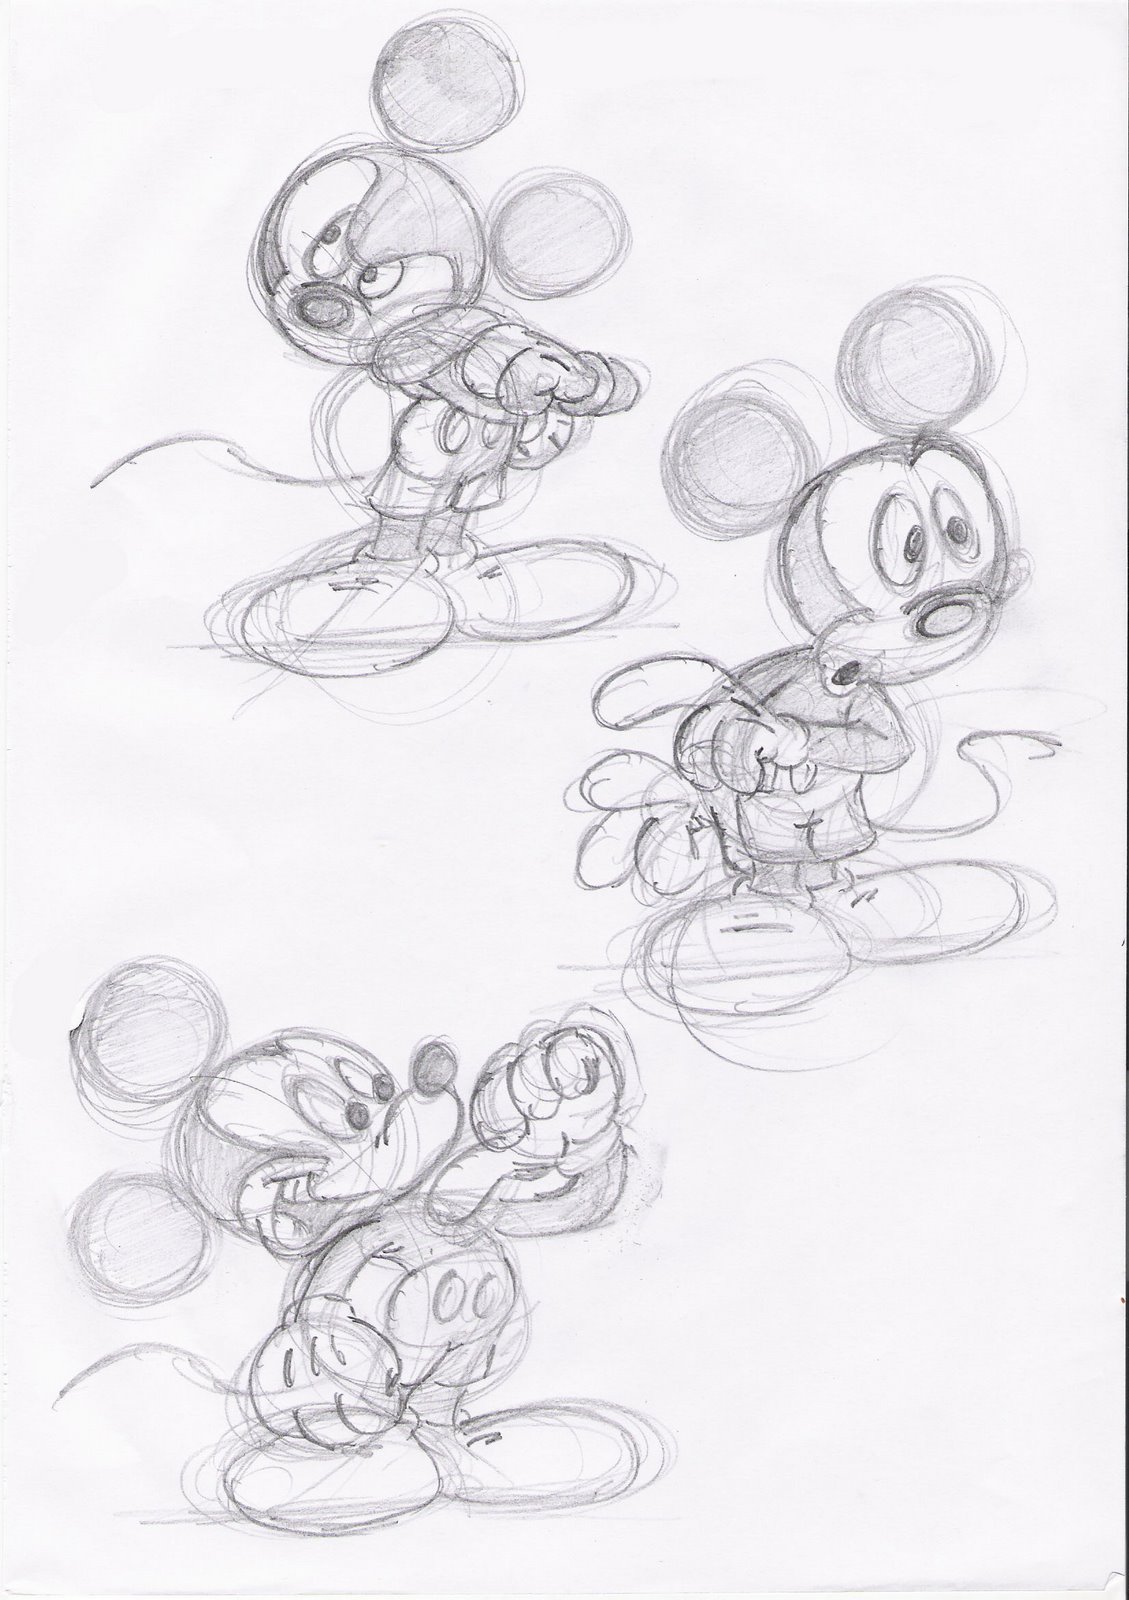 [Disney_Contest_Mickey_Mouse_Rough_Drawings.jpg]